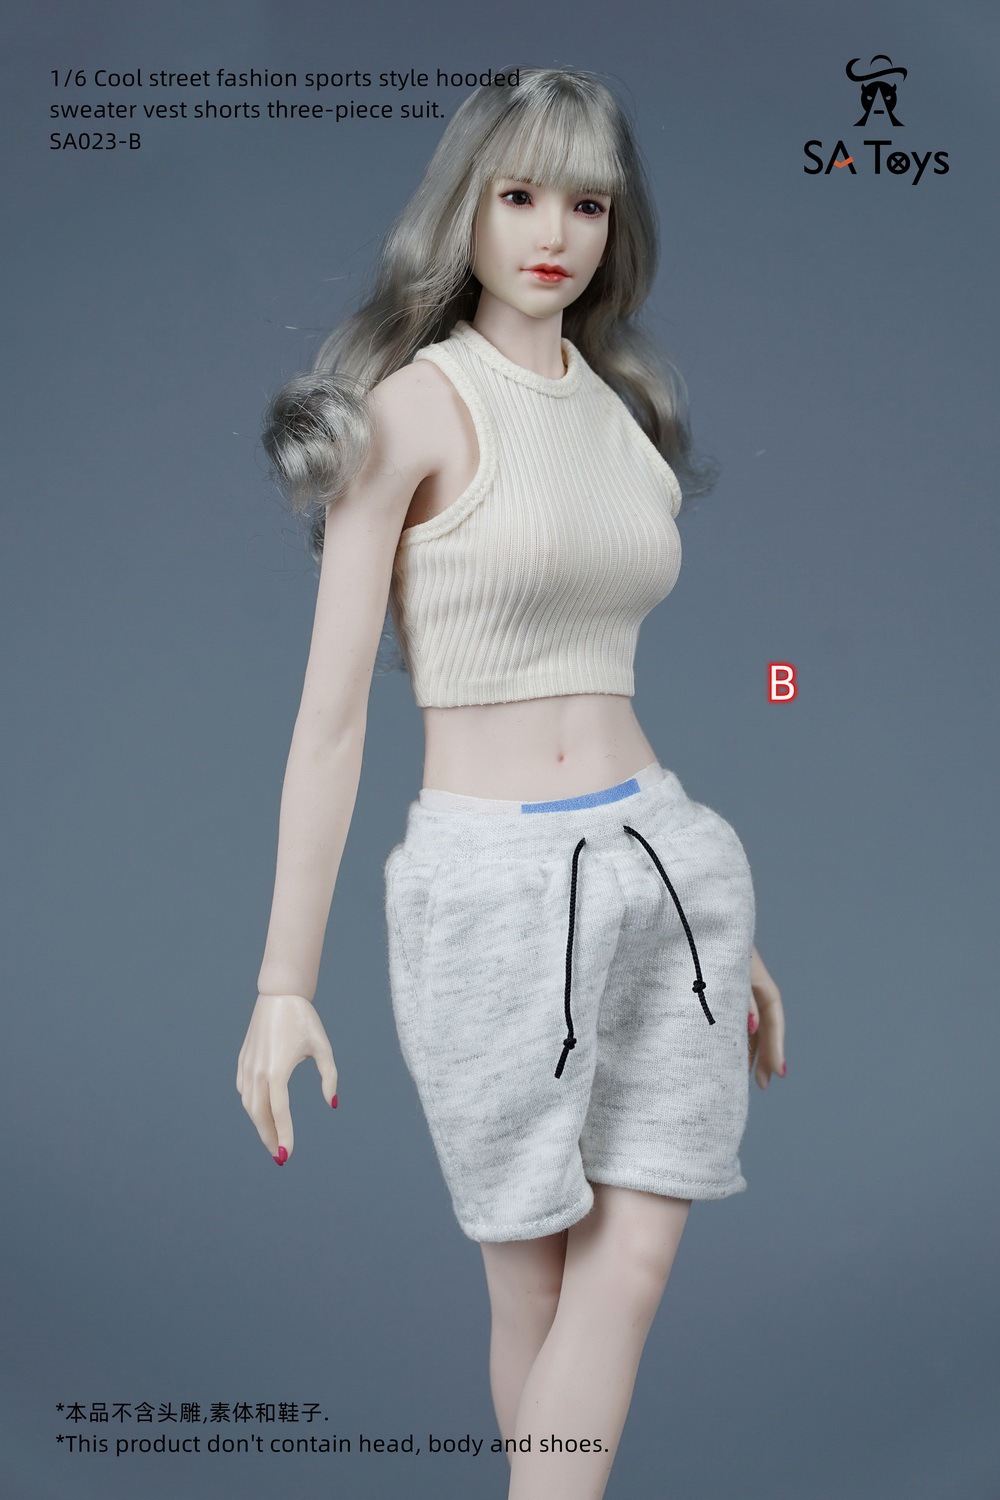 SAToys - NEW PRODUCT: SA Toys: 1/6 hip skirt / floral elastic skirt / fashionable sports style hooded sweater cover, hip-hop fisherman hat halter and footwear casual pants [variety optional] 17020112